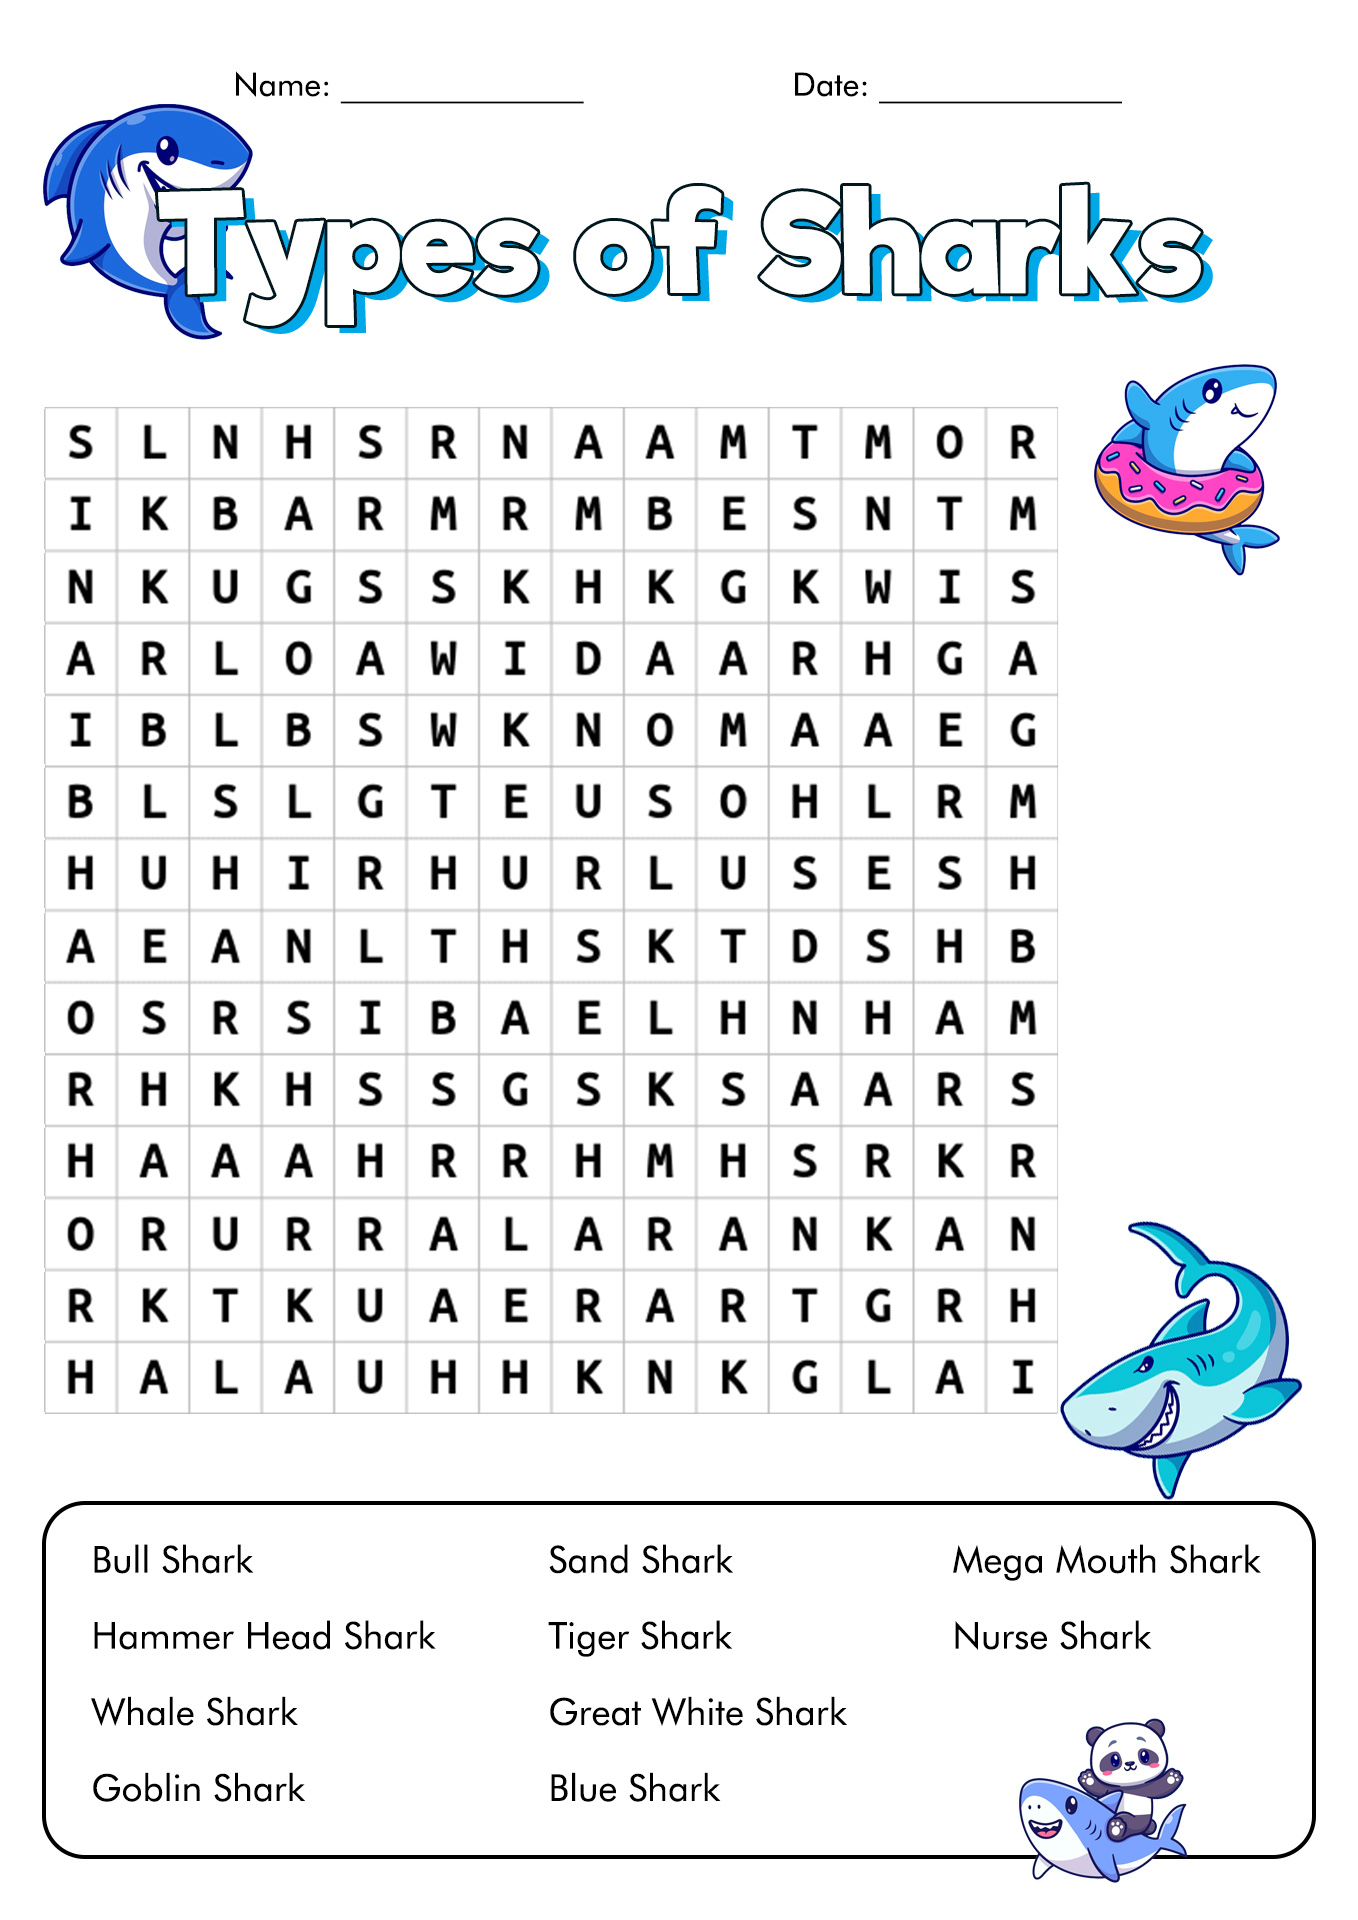 Shark Word Search Image